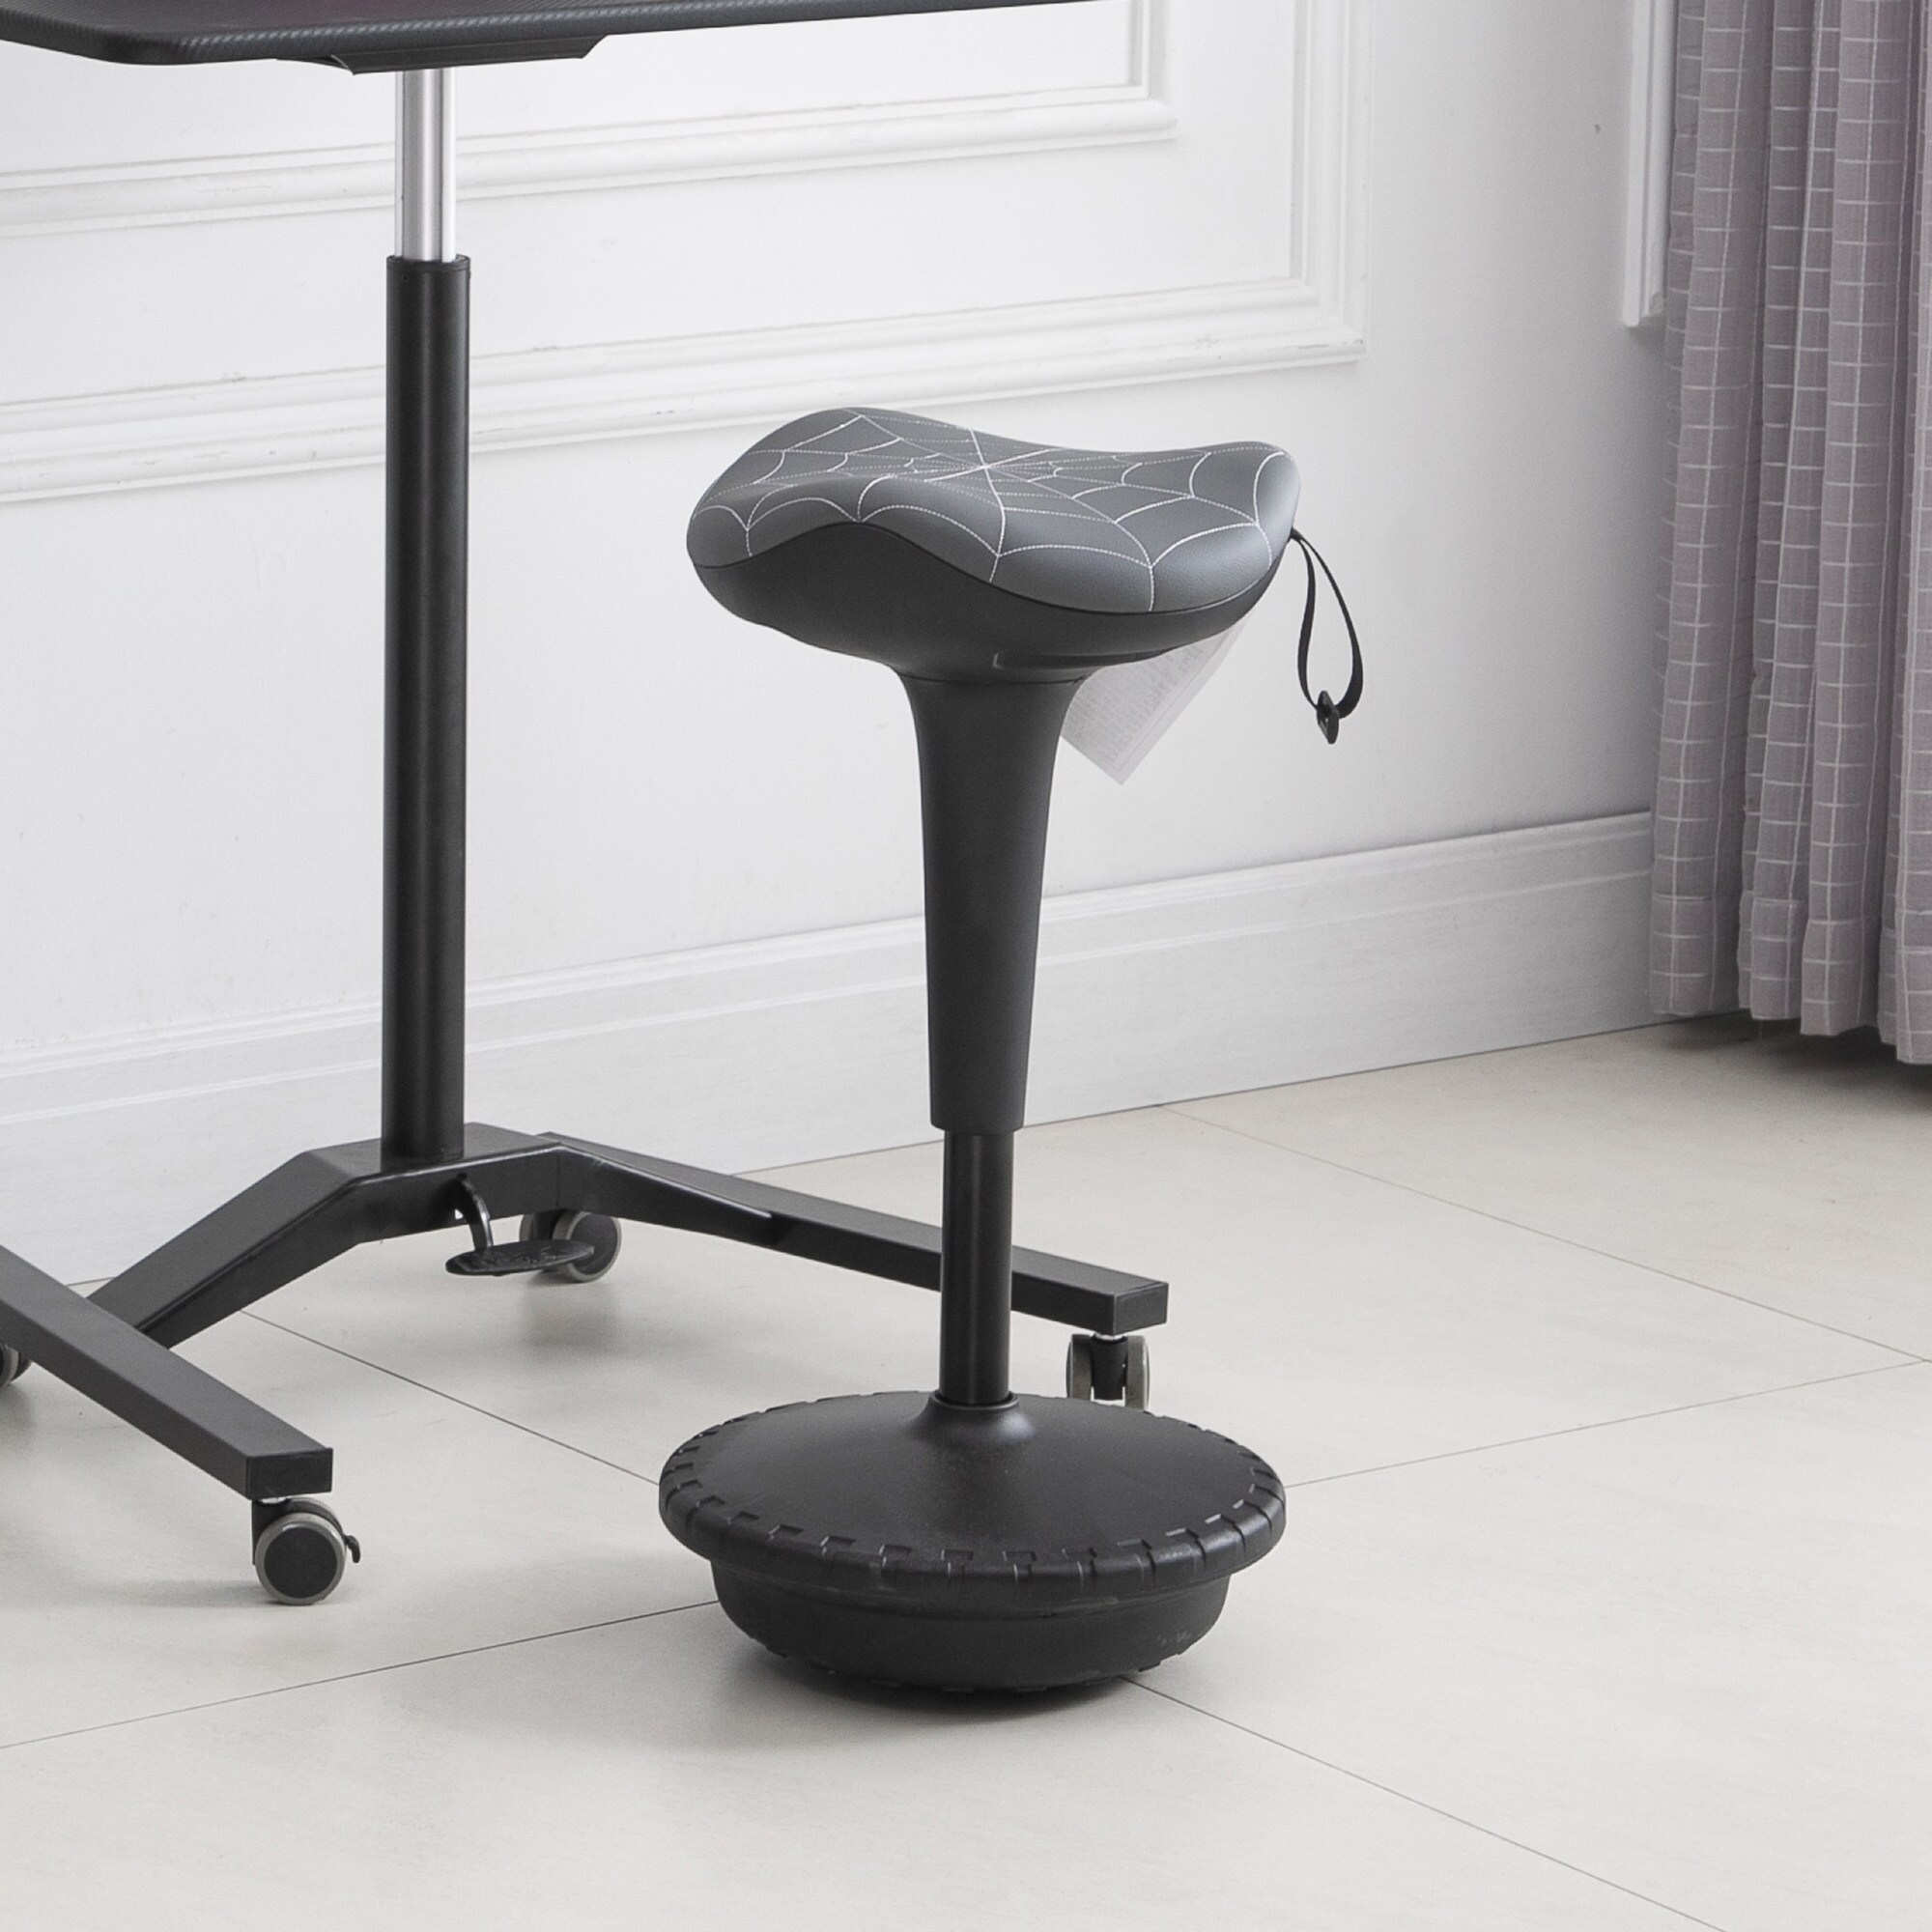 https://ak1.ostkcdn.com/images/products/is/images/direct/b285d570e4ff73bb9d936e921509f4b9d28ab08a/Vinsetto-Lift-Wobble-Stool-Standing-Desk-Chair-360%C2%B0-Swivel%2C-Tilting%2C-with-Adjustable-Height-and-Saddle-Seat%2C-Grey.jpg